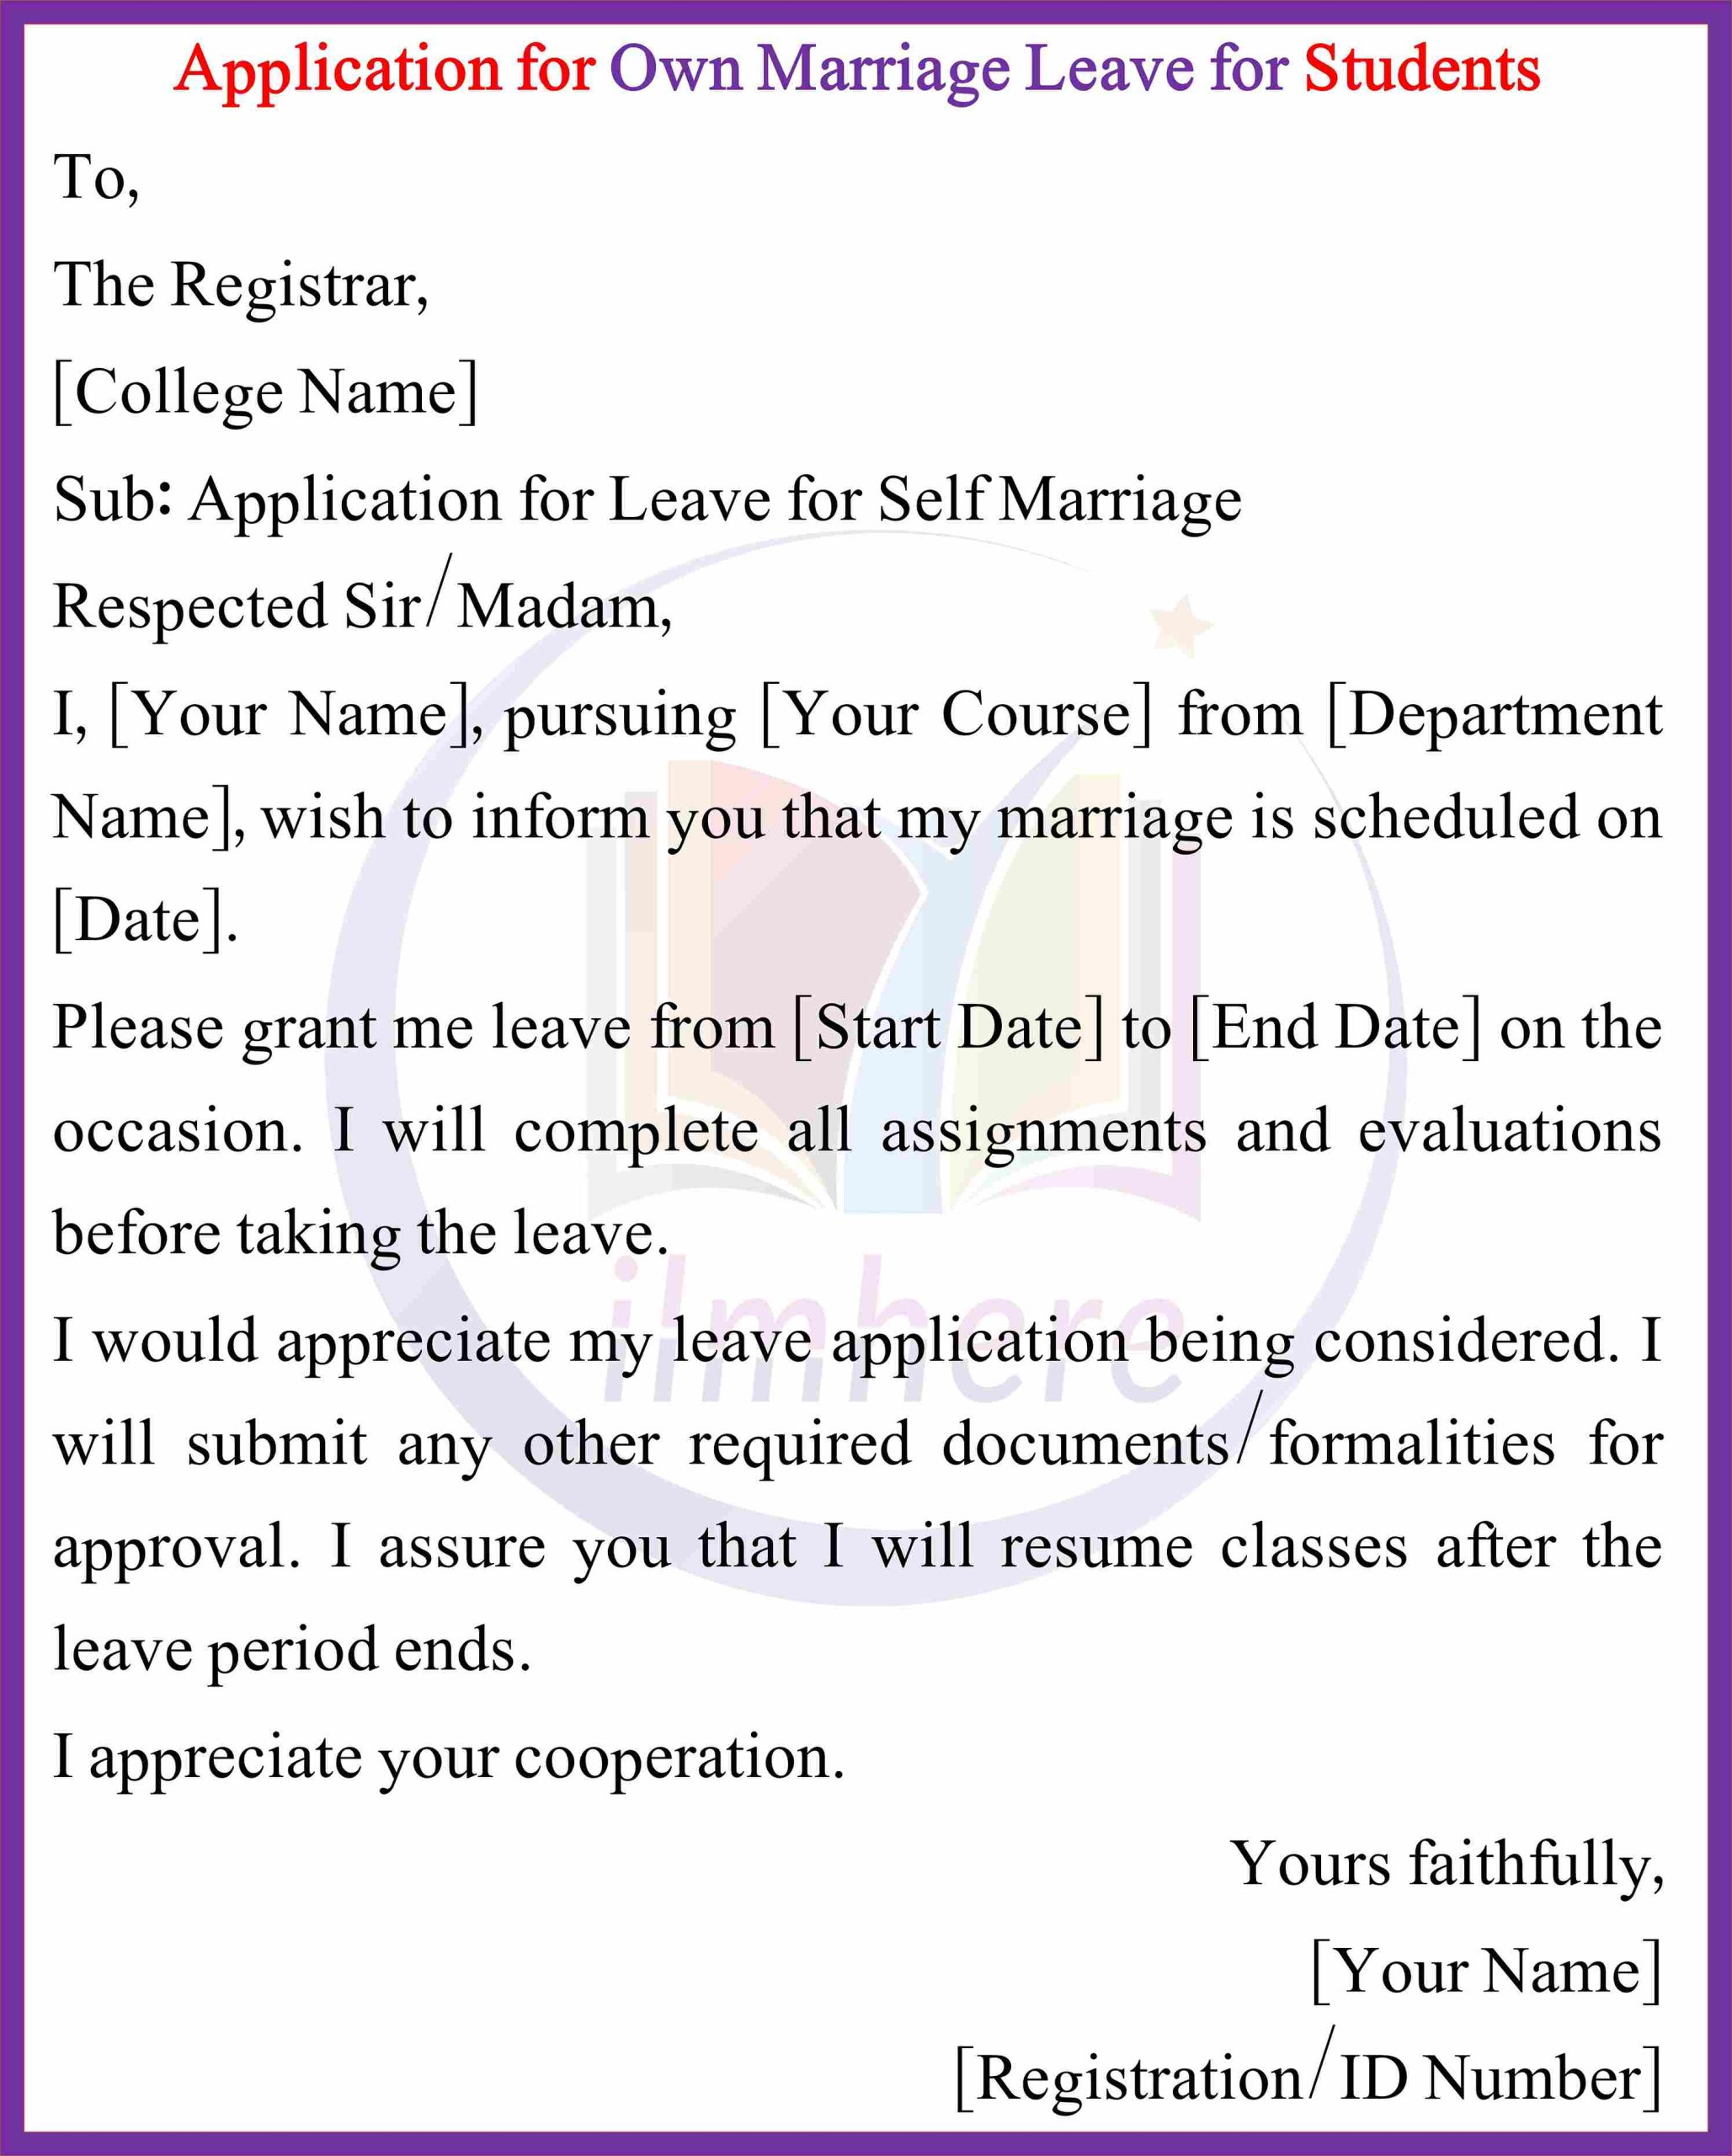 Application for Own Marriage Leave for Students